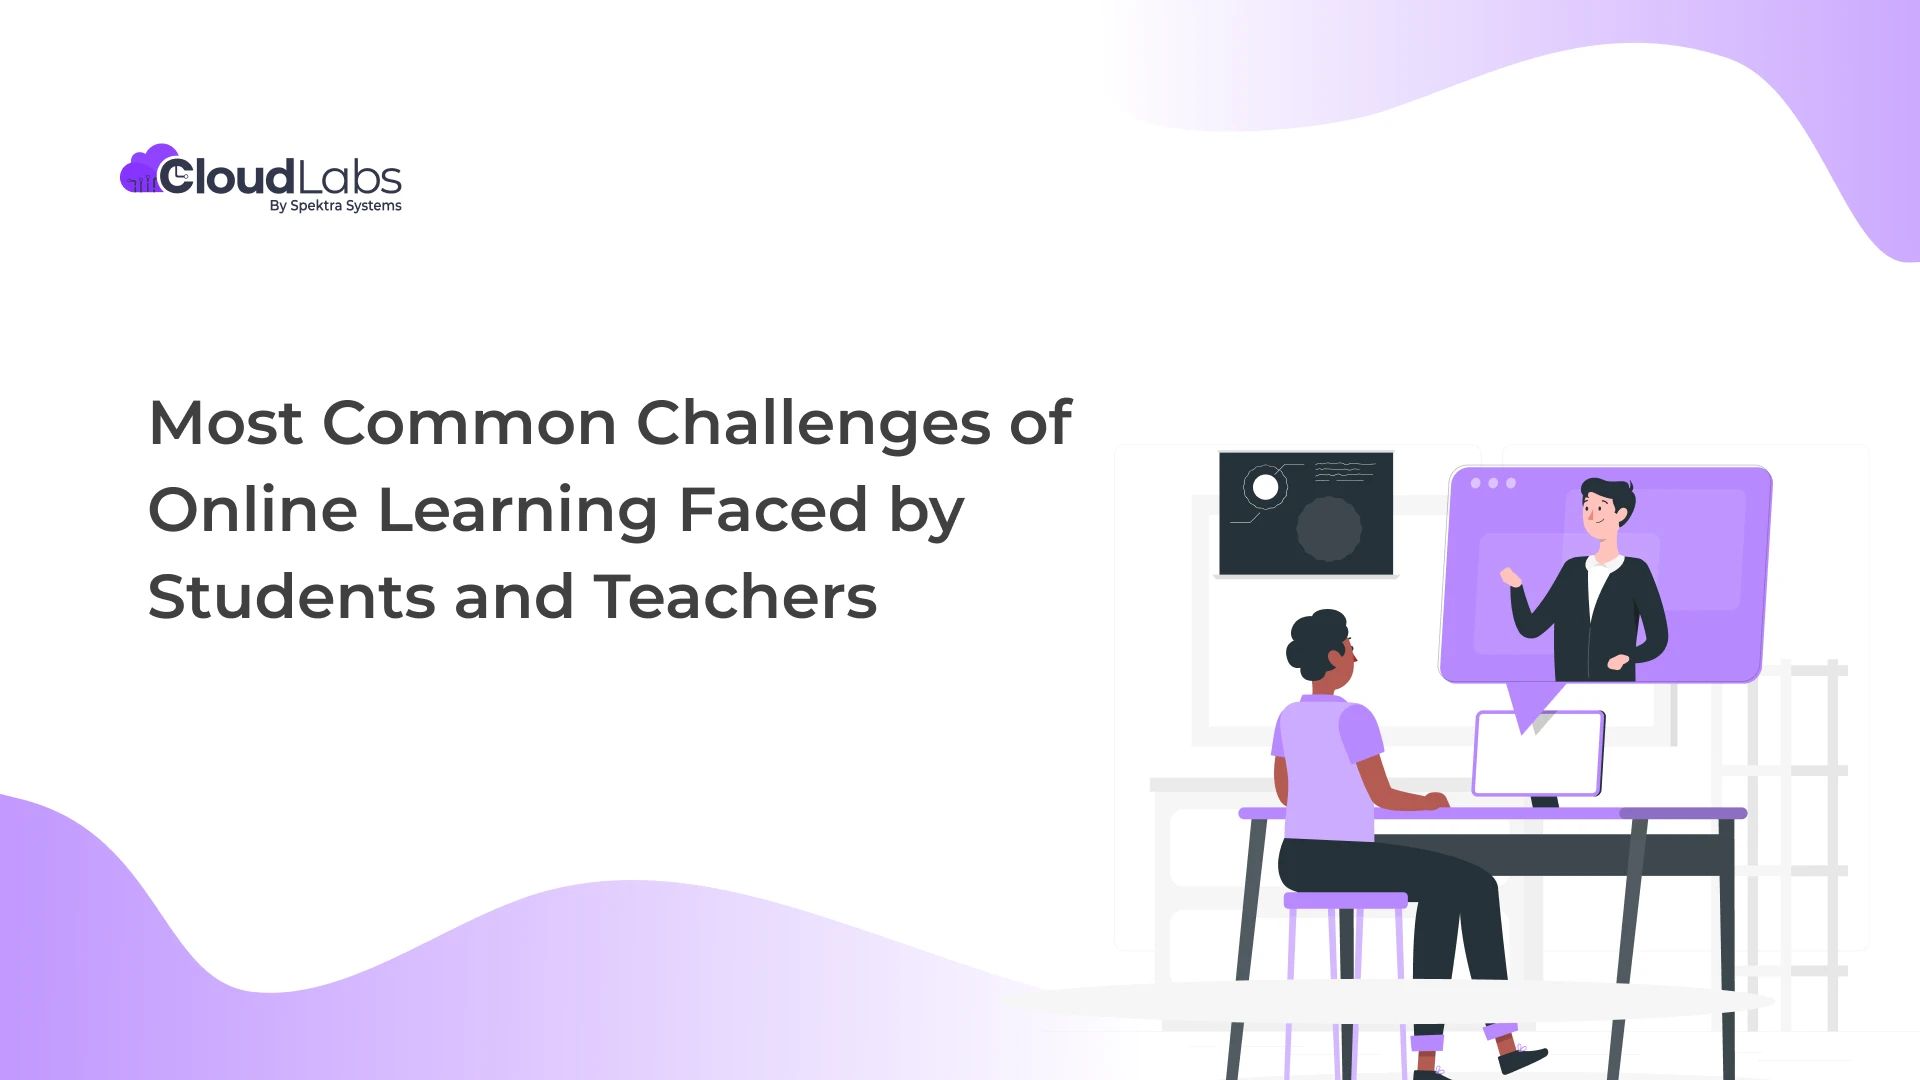 Most Common Challenges of Online Learning Faced by Students and Teachers